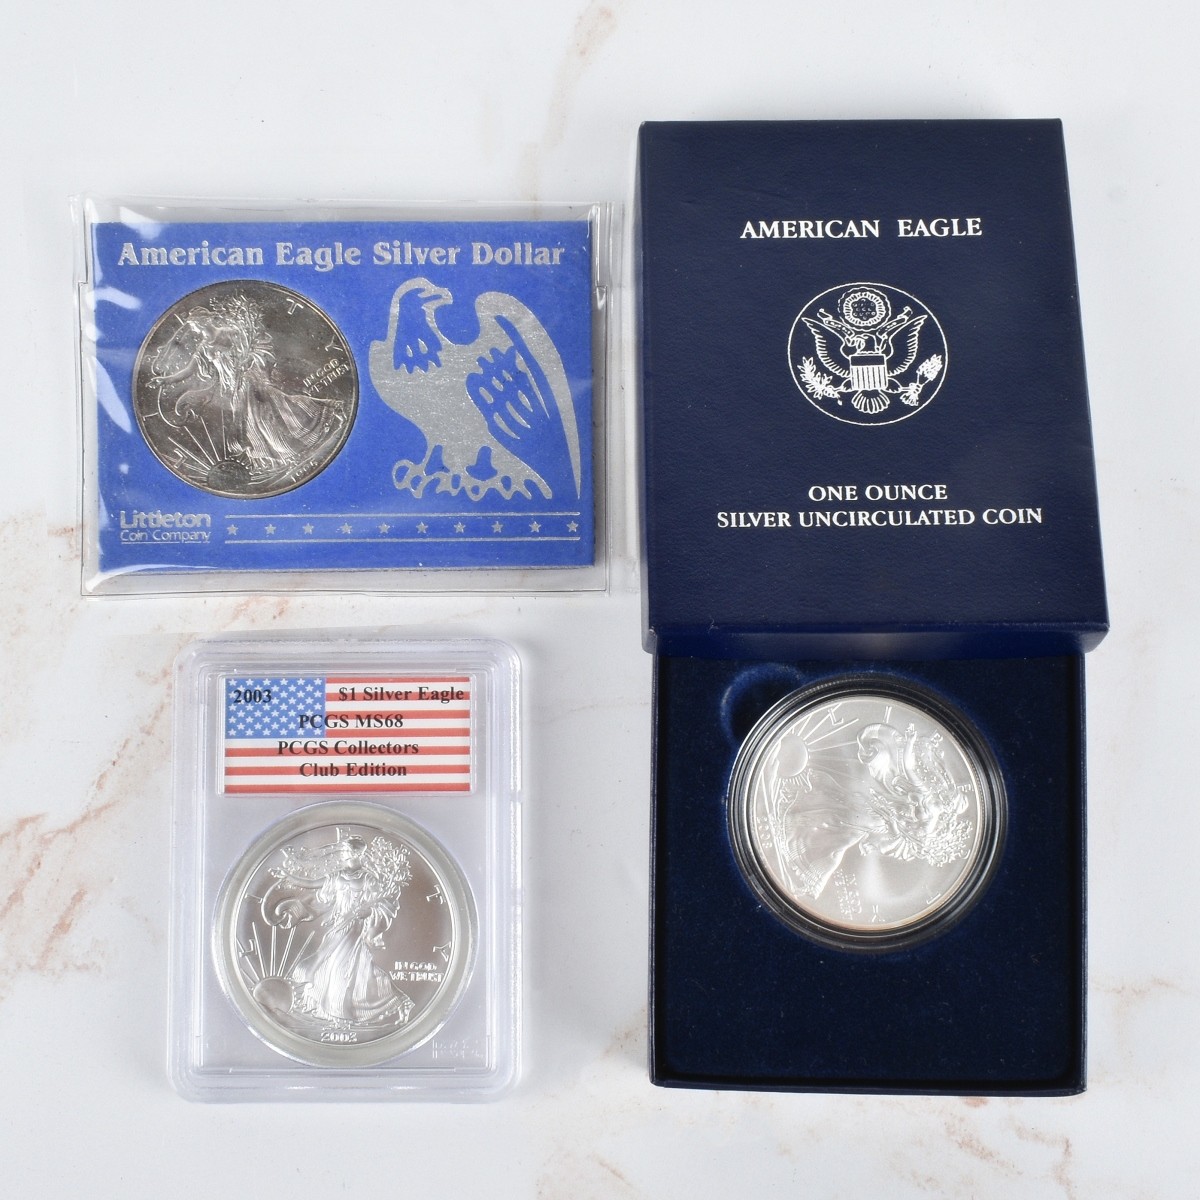 US $1 Silver Eagle Coins.